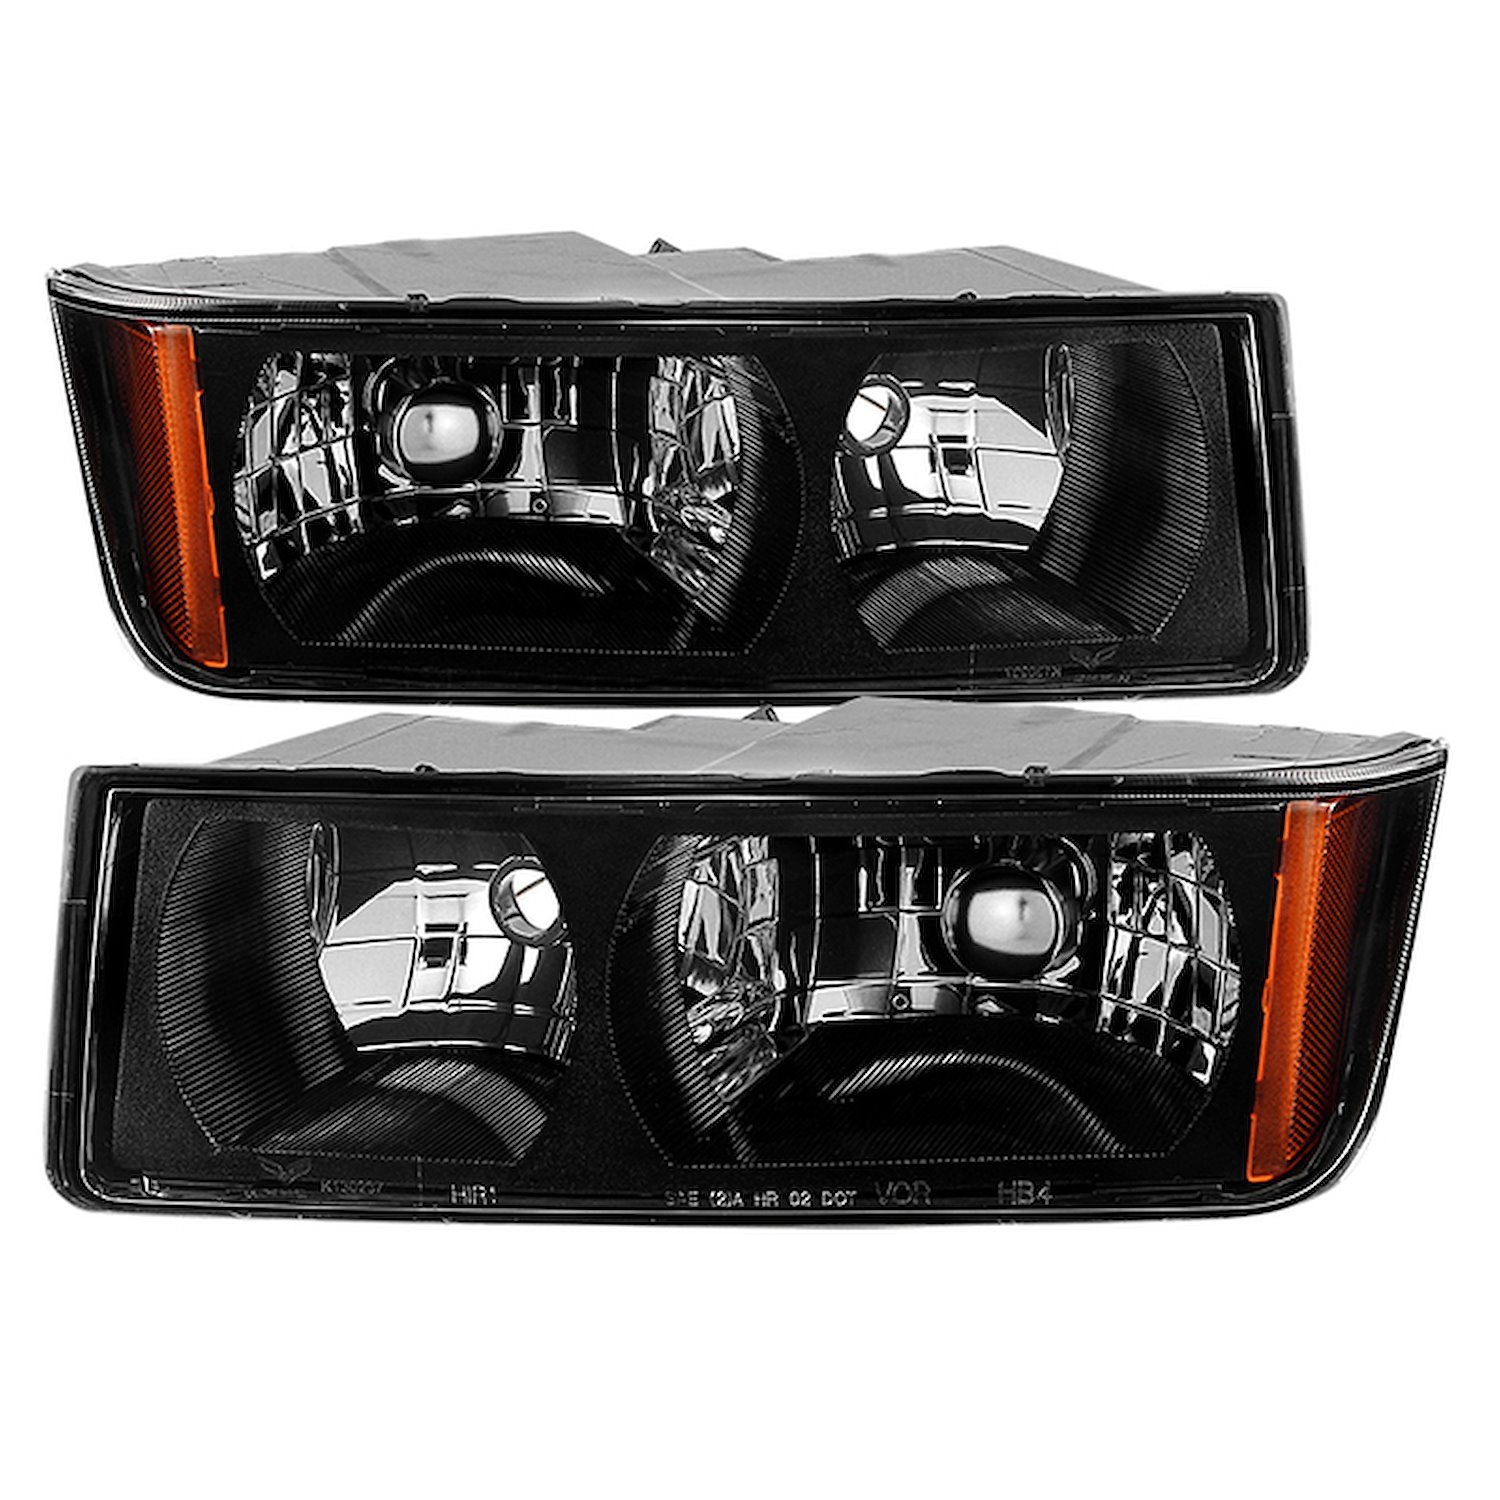 xTune OEM Style Crystal Headlights 2002-2006 Chevy Avalanche